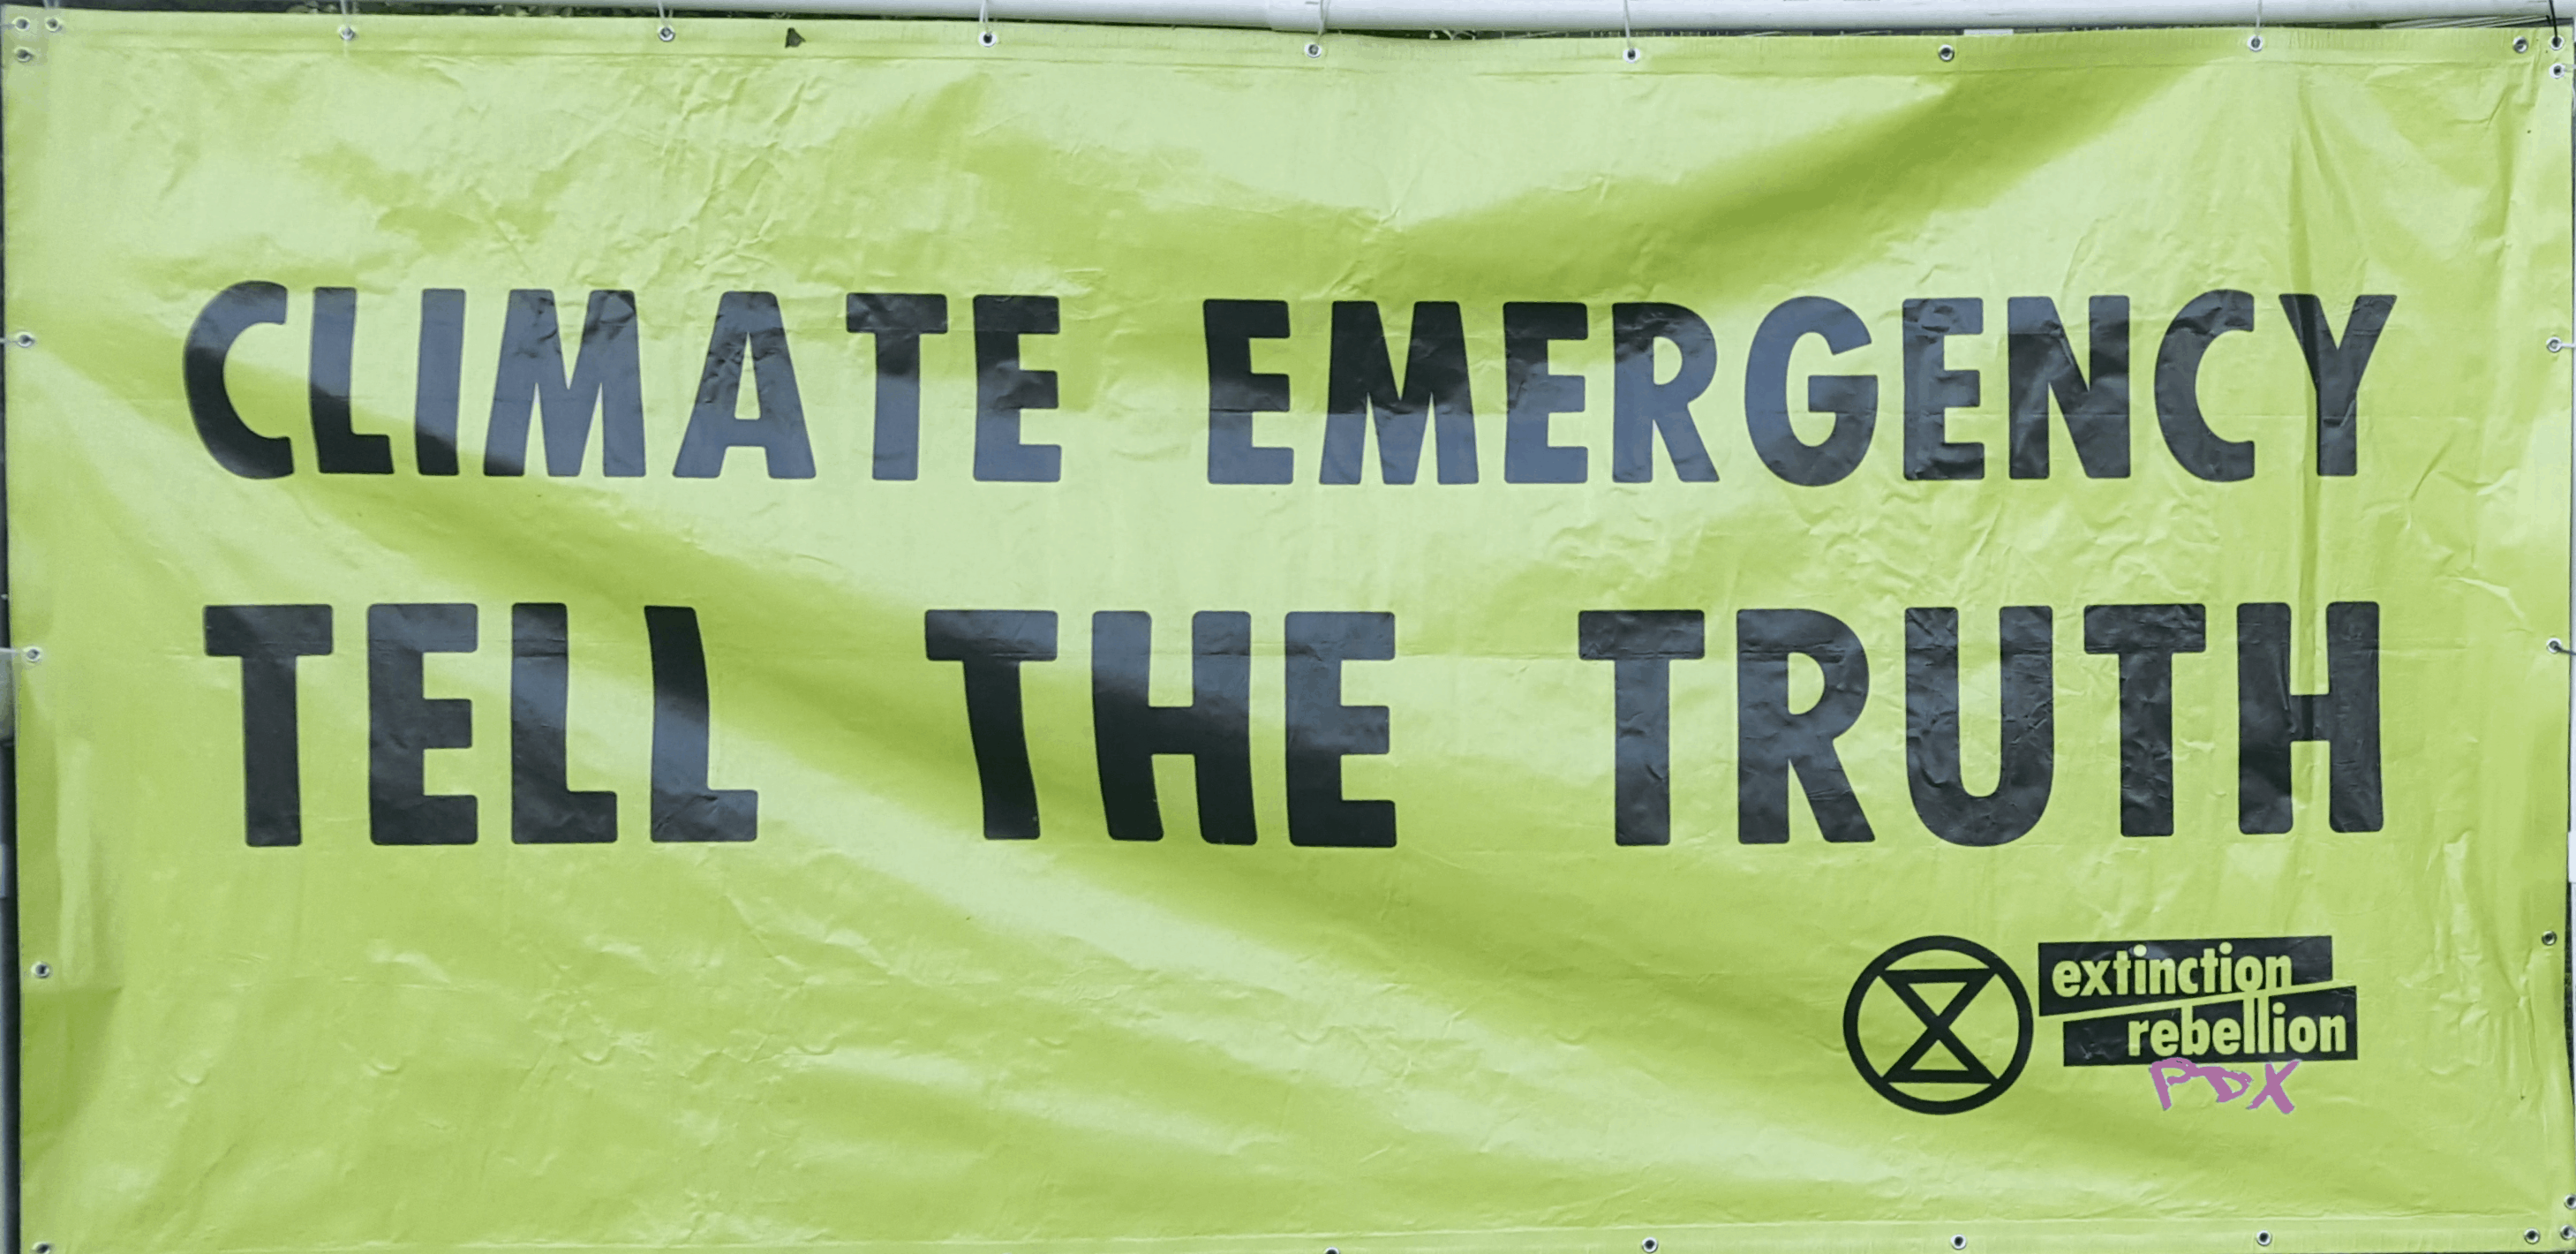 A big green banner that says "Climate Emergency: Tell the Truth